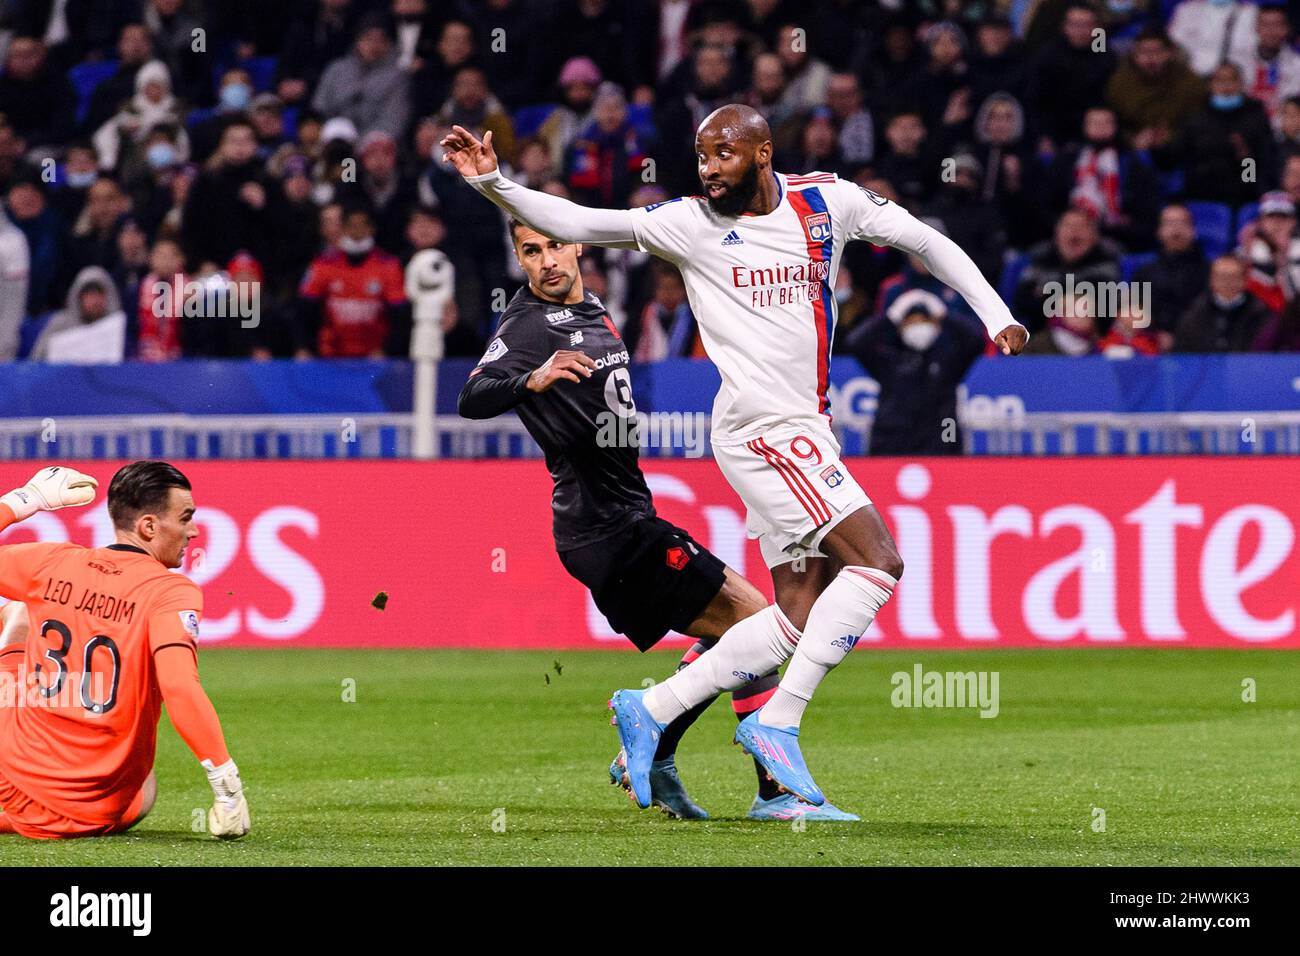 Lyon, France - February 27: Moussa Dembele of Lyon (R) attempts a kick while being defended by Leonardo Jardim of Lille (L) during the Ligue 1 Uber Ea Stock Photo